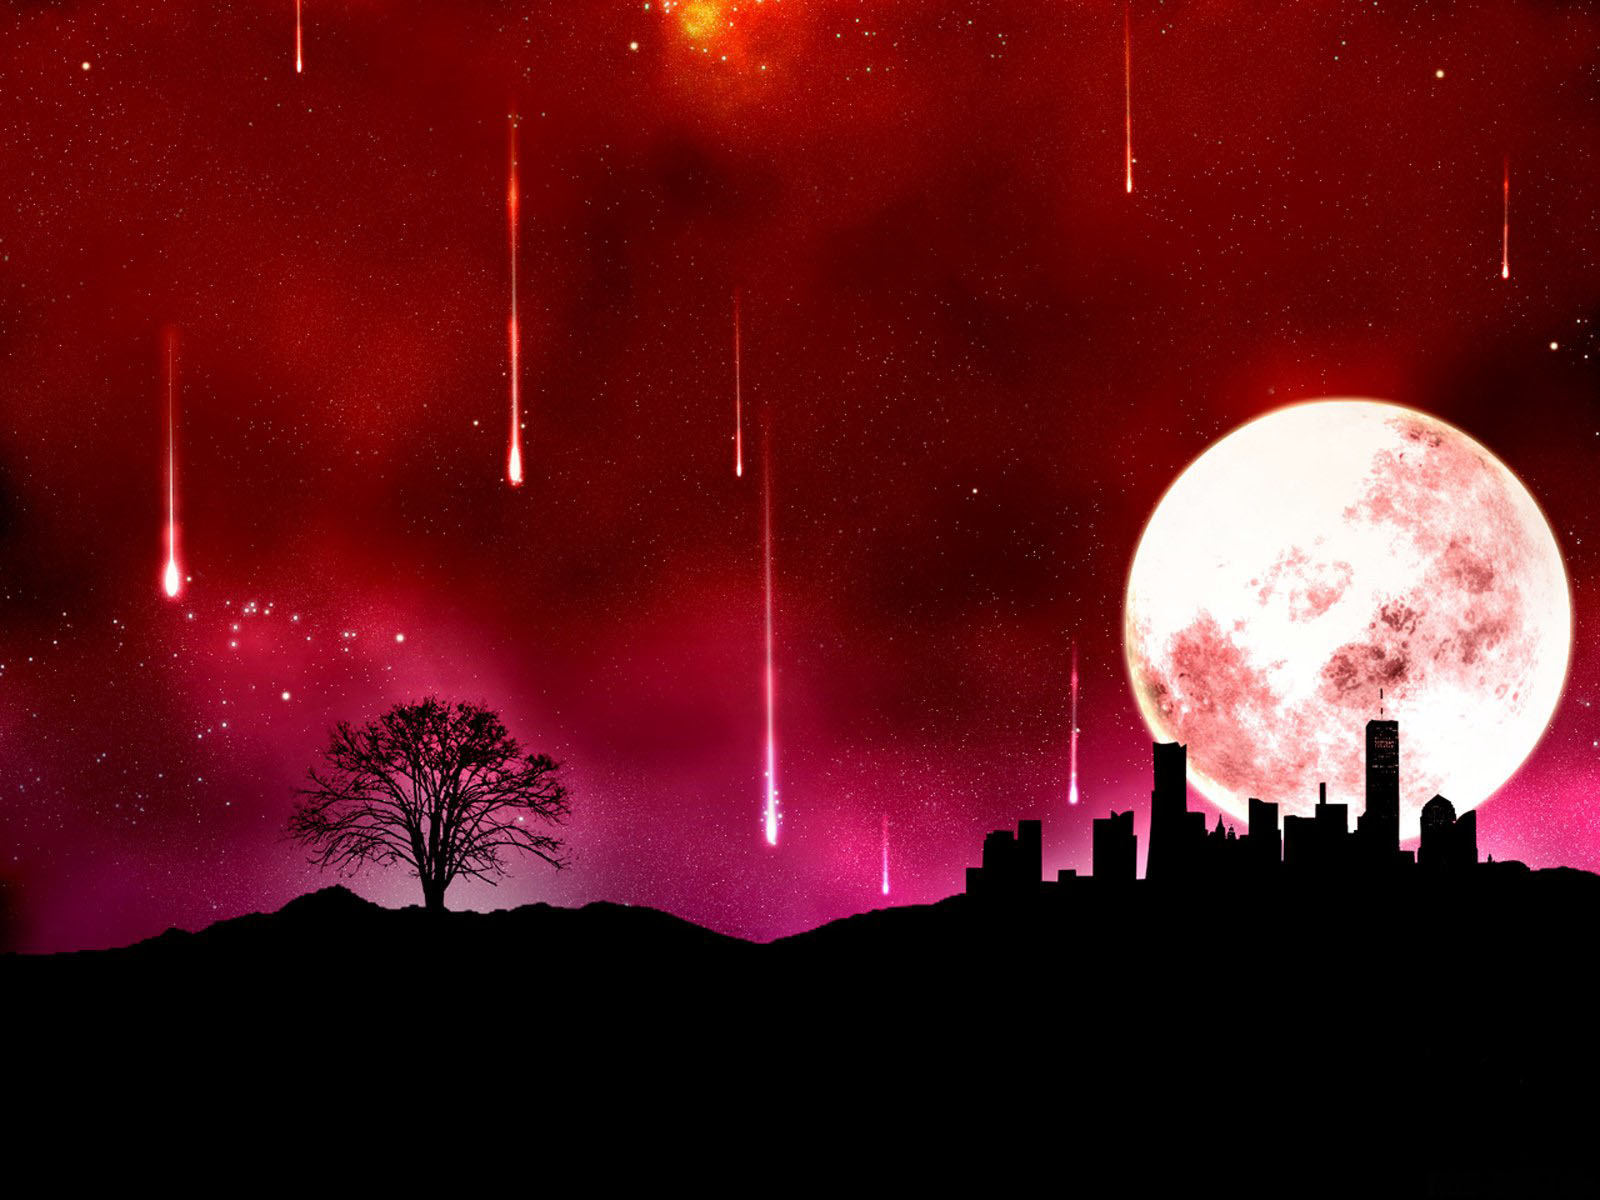 Comet Wallpaper Hd - Red Moon Anime Background - 1600x1200 Wallpaper -  